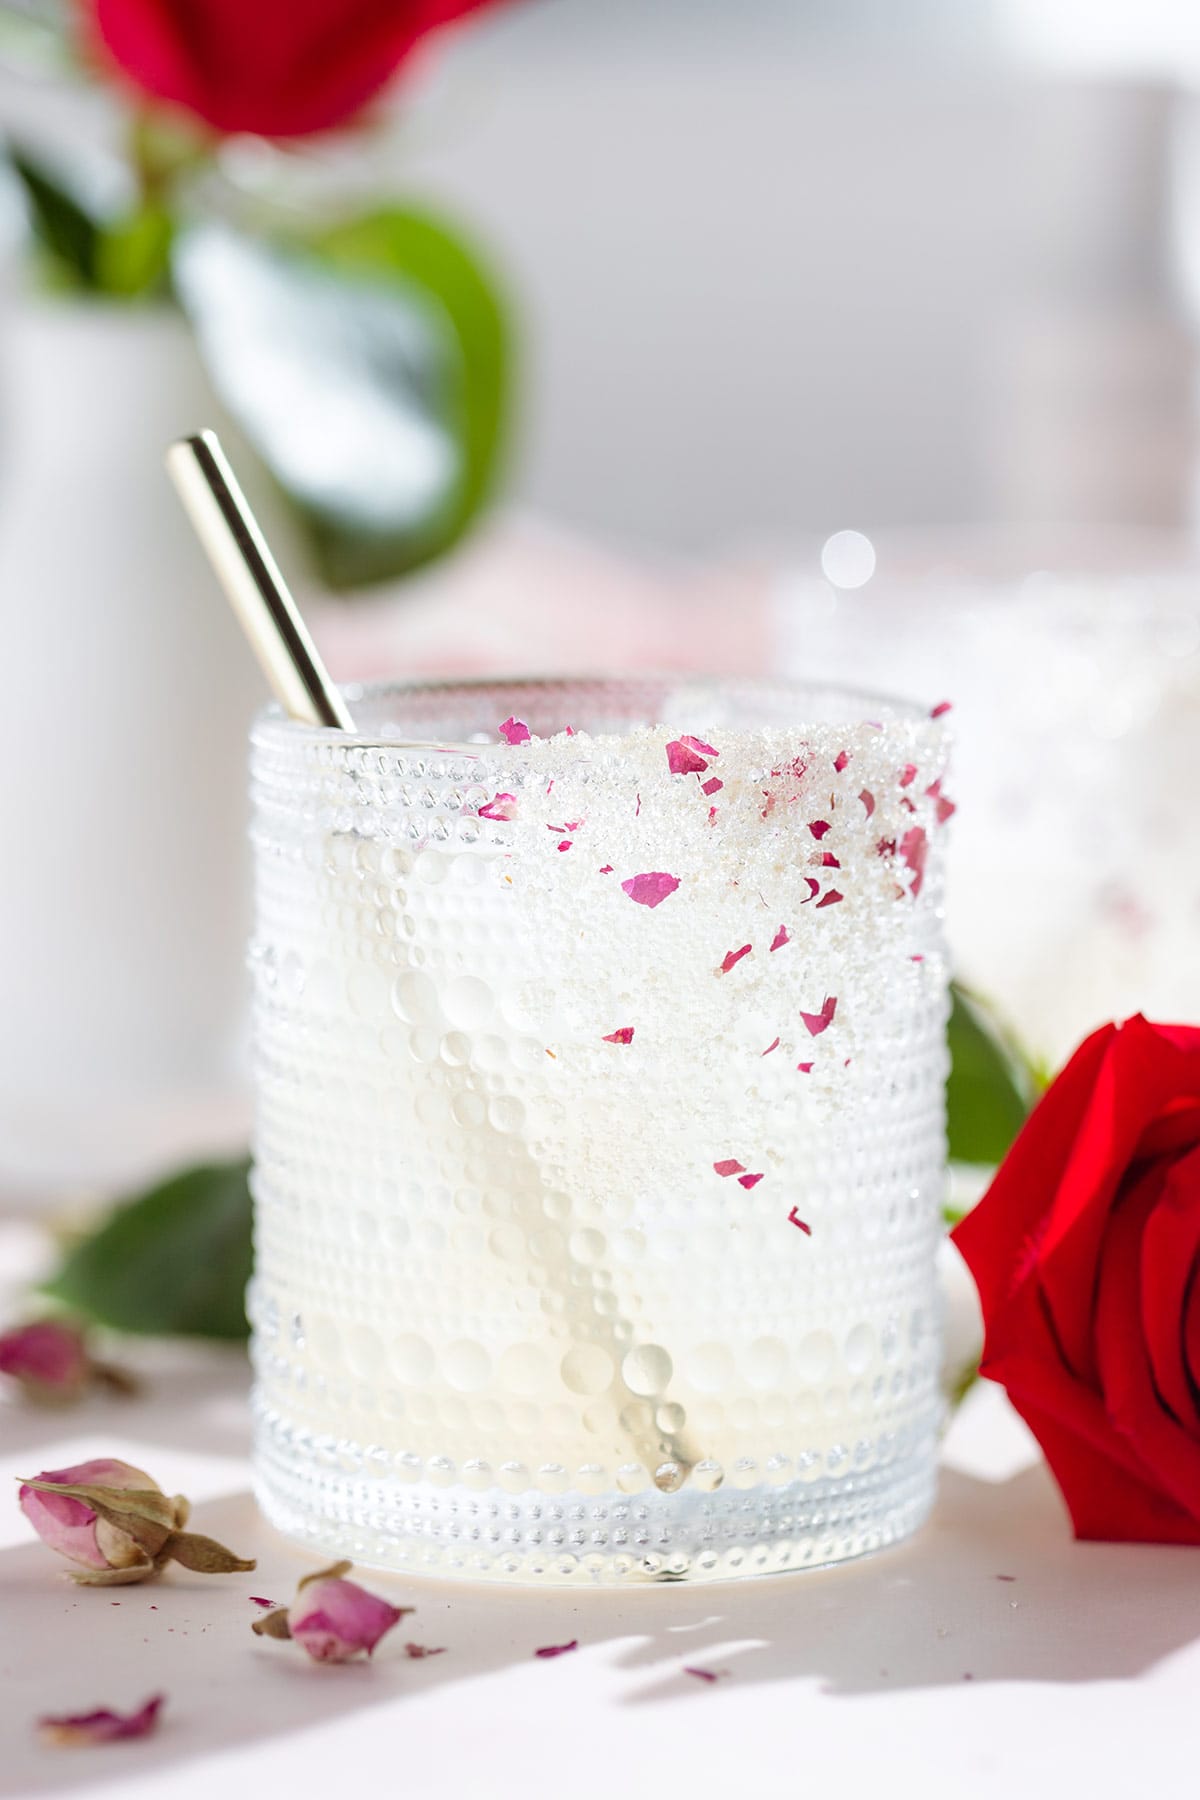 A margarita cocktail in a short glass garnished with a sugar rim with crushed dried rose petals and a gold straw with red roses around the glass.